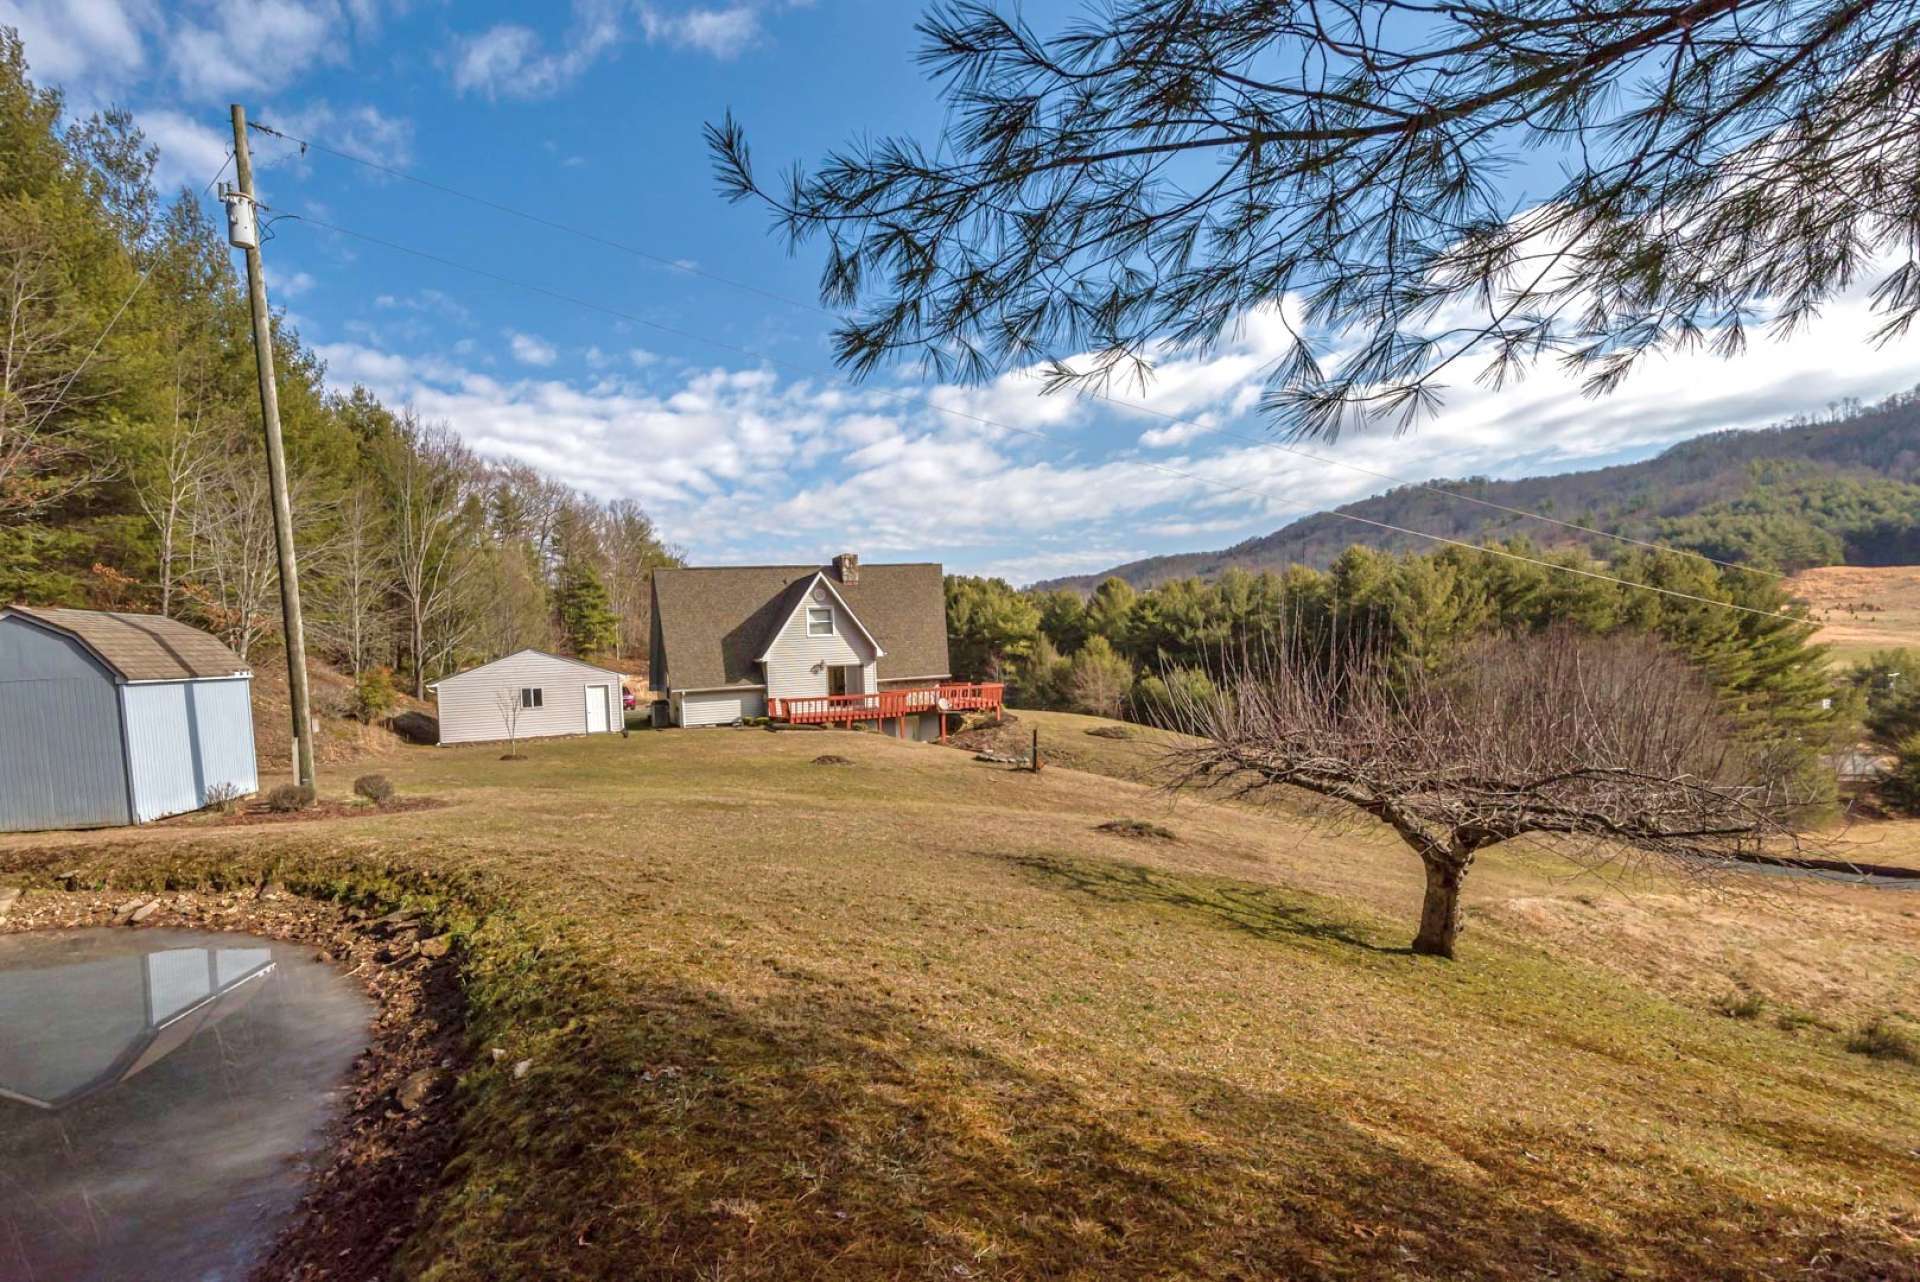 This picturesque setting is convenient to Boone, Blowing Rock, West Jefferson, and many destinations of the NC Mountain High Country.